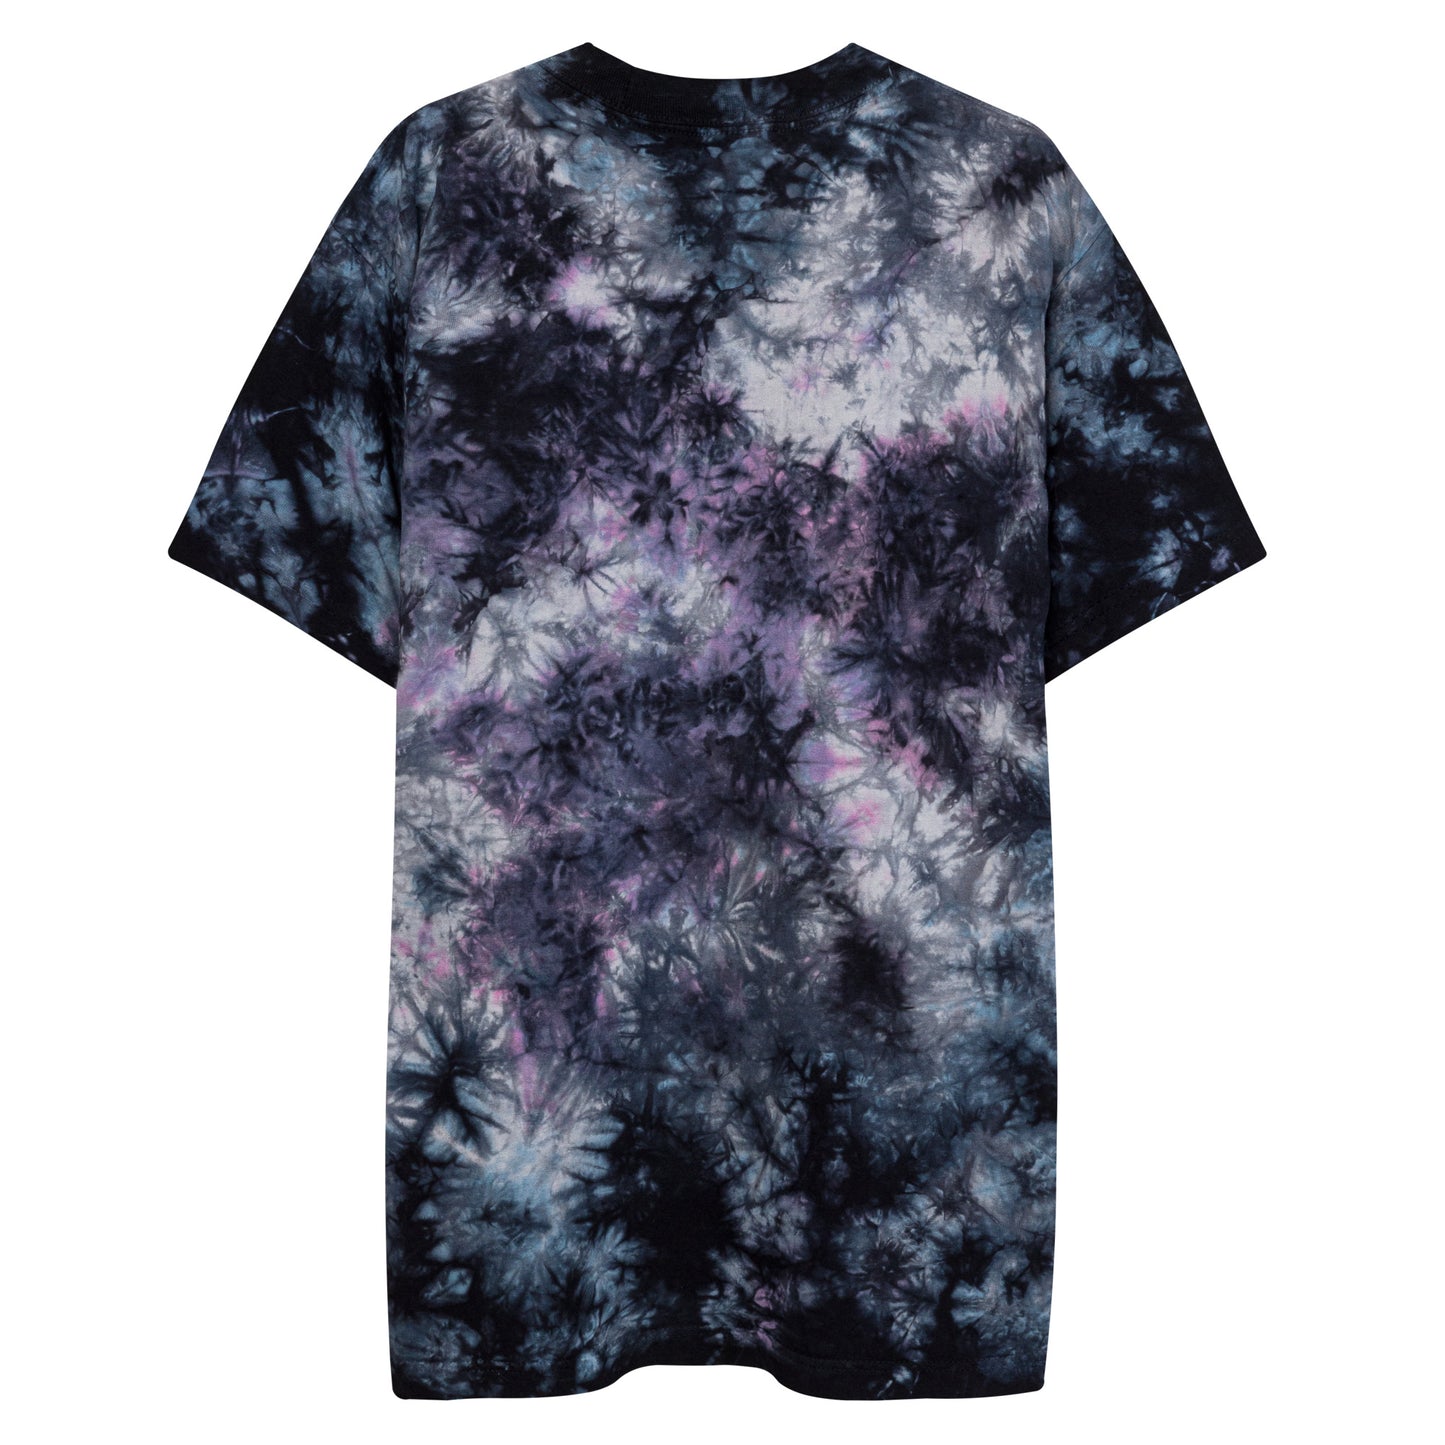 "Bruh Go To Therapy" Oversized Tie-Dye Tee